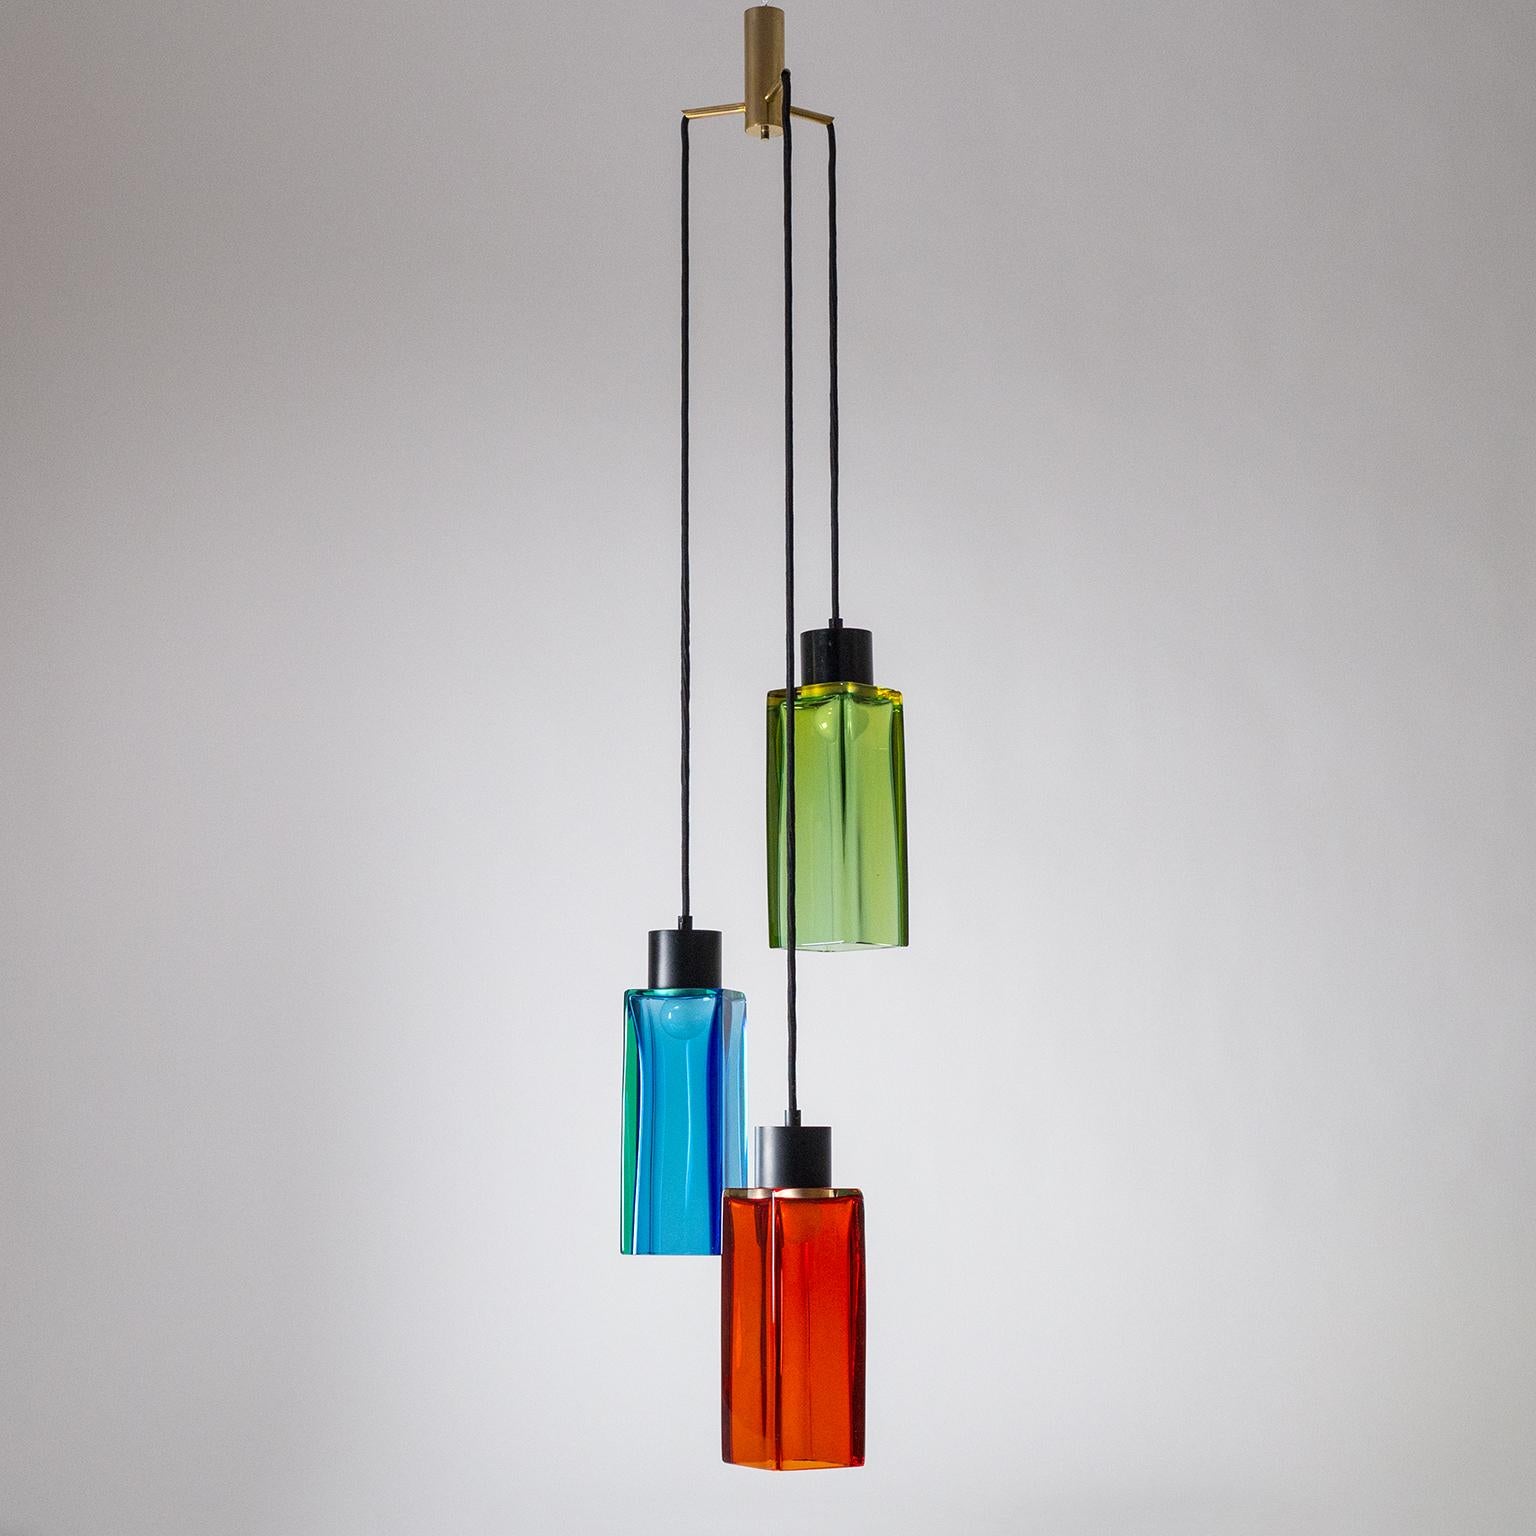 Gorgeous Flavio Poli cascading chandelier for Seguso with three unusually large 'Sommerso' glass shades. Sommerso (lit. 